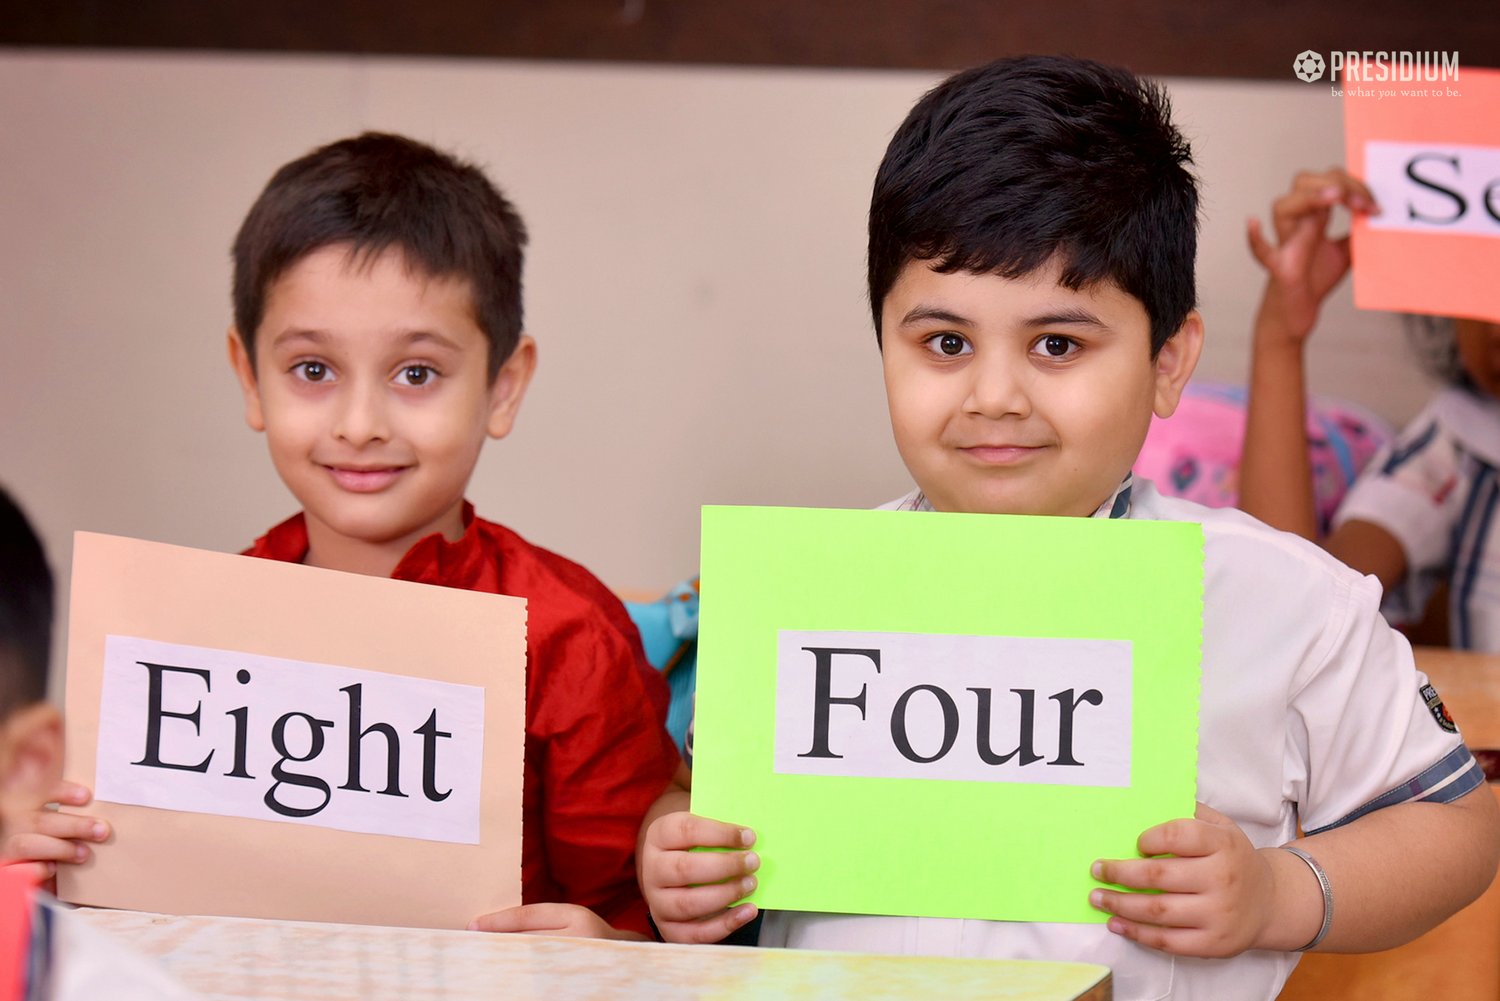 Presidium Gurgaon-57, YOUNG MINDS UNDERSTAND THE CONCEPT OF NUMBER NAMES